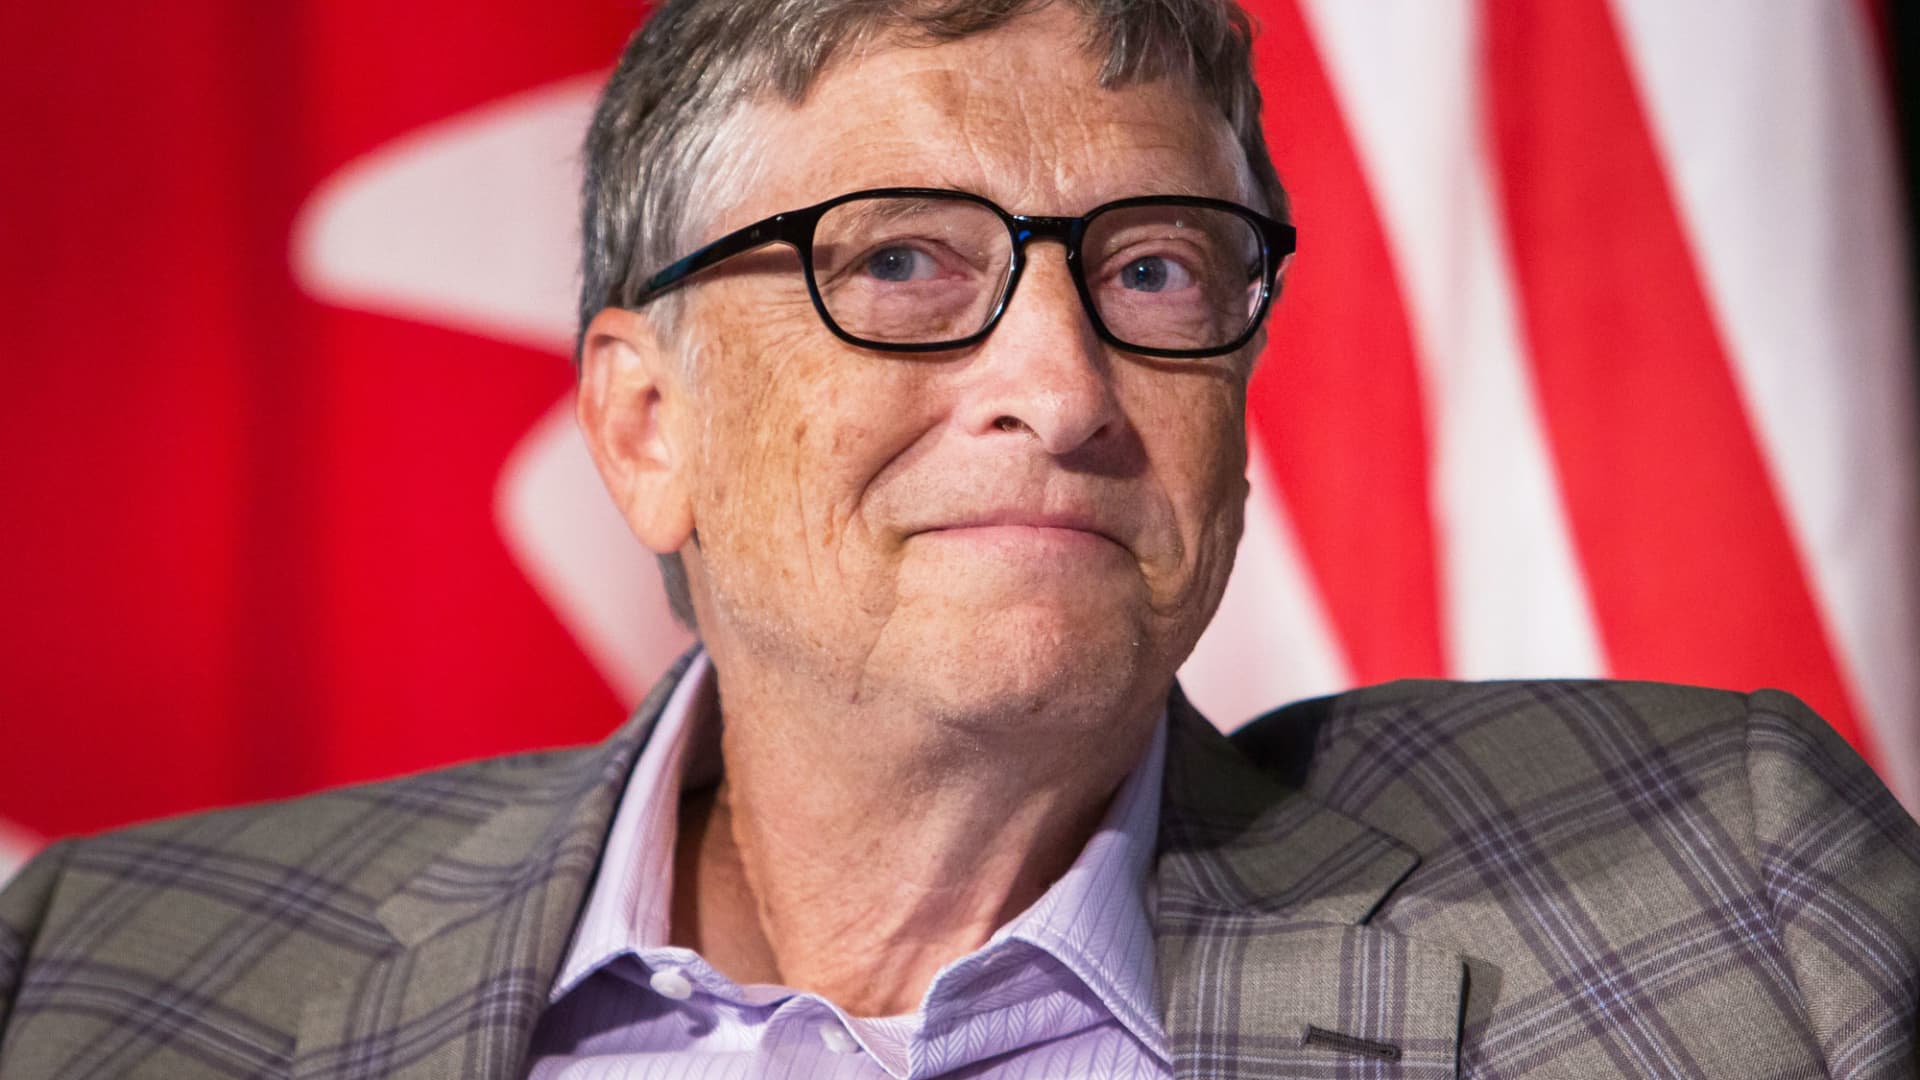 Bill Gates: These 5 books are so good, 'they kept me up reading long past' bedtime